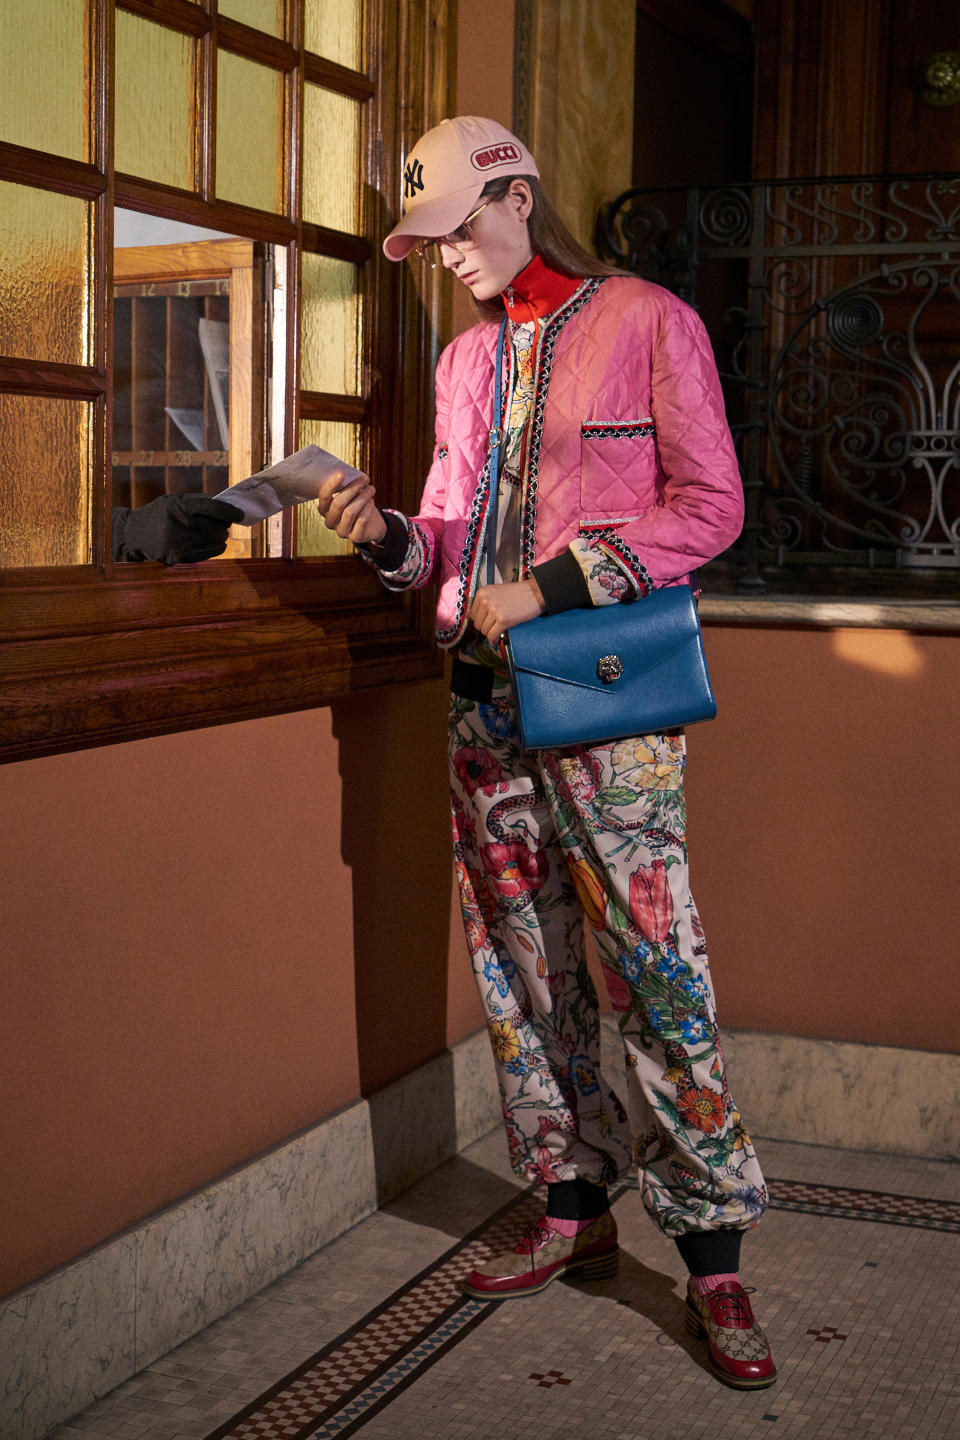 Photo credit: Photo by Peter Schlesinger/Courtesy of Gucci